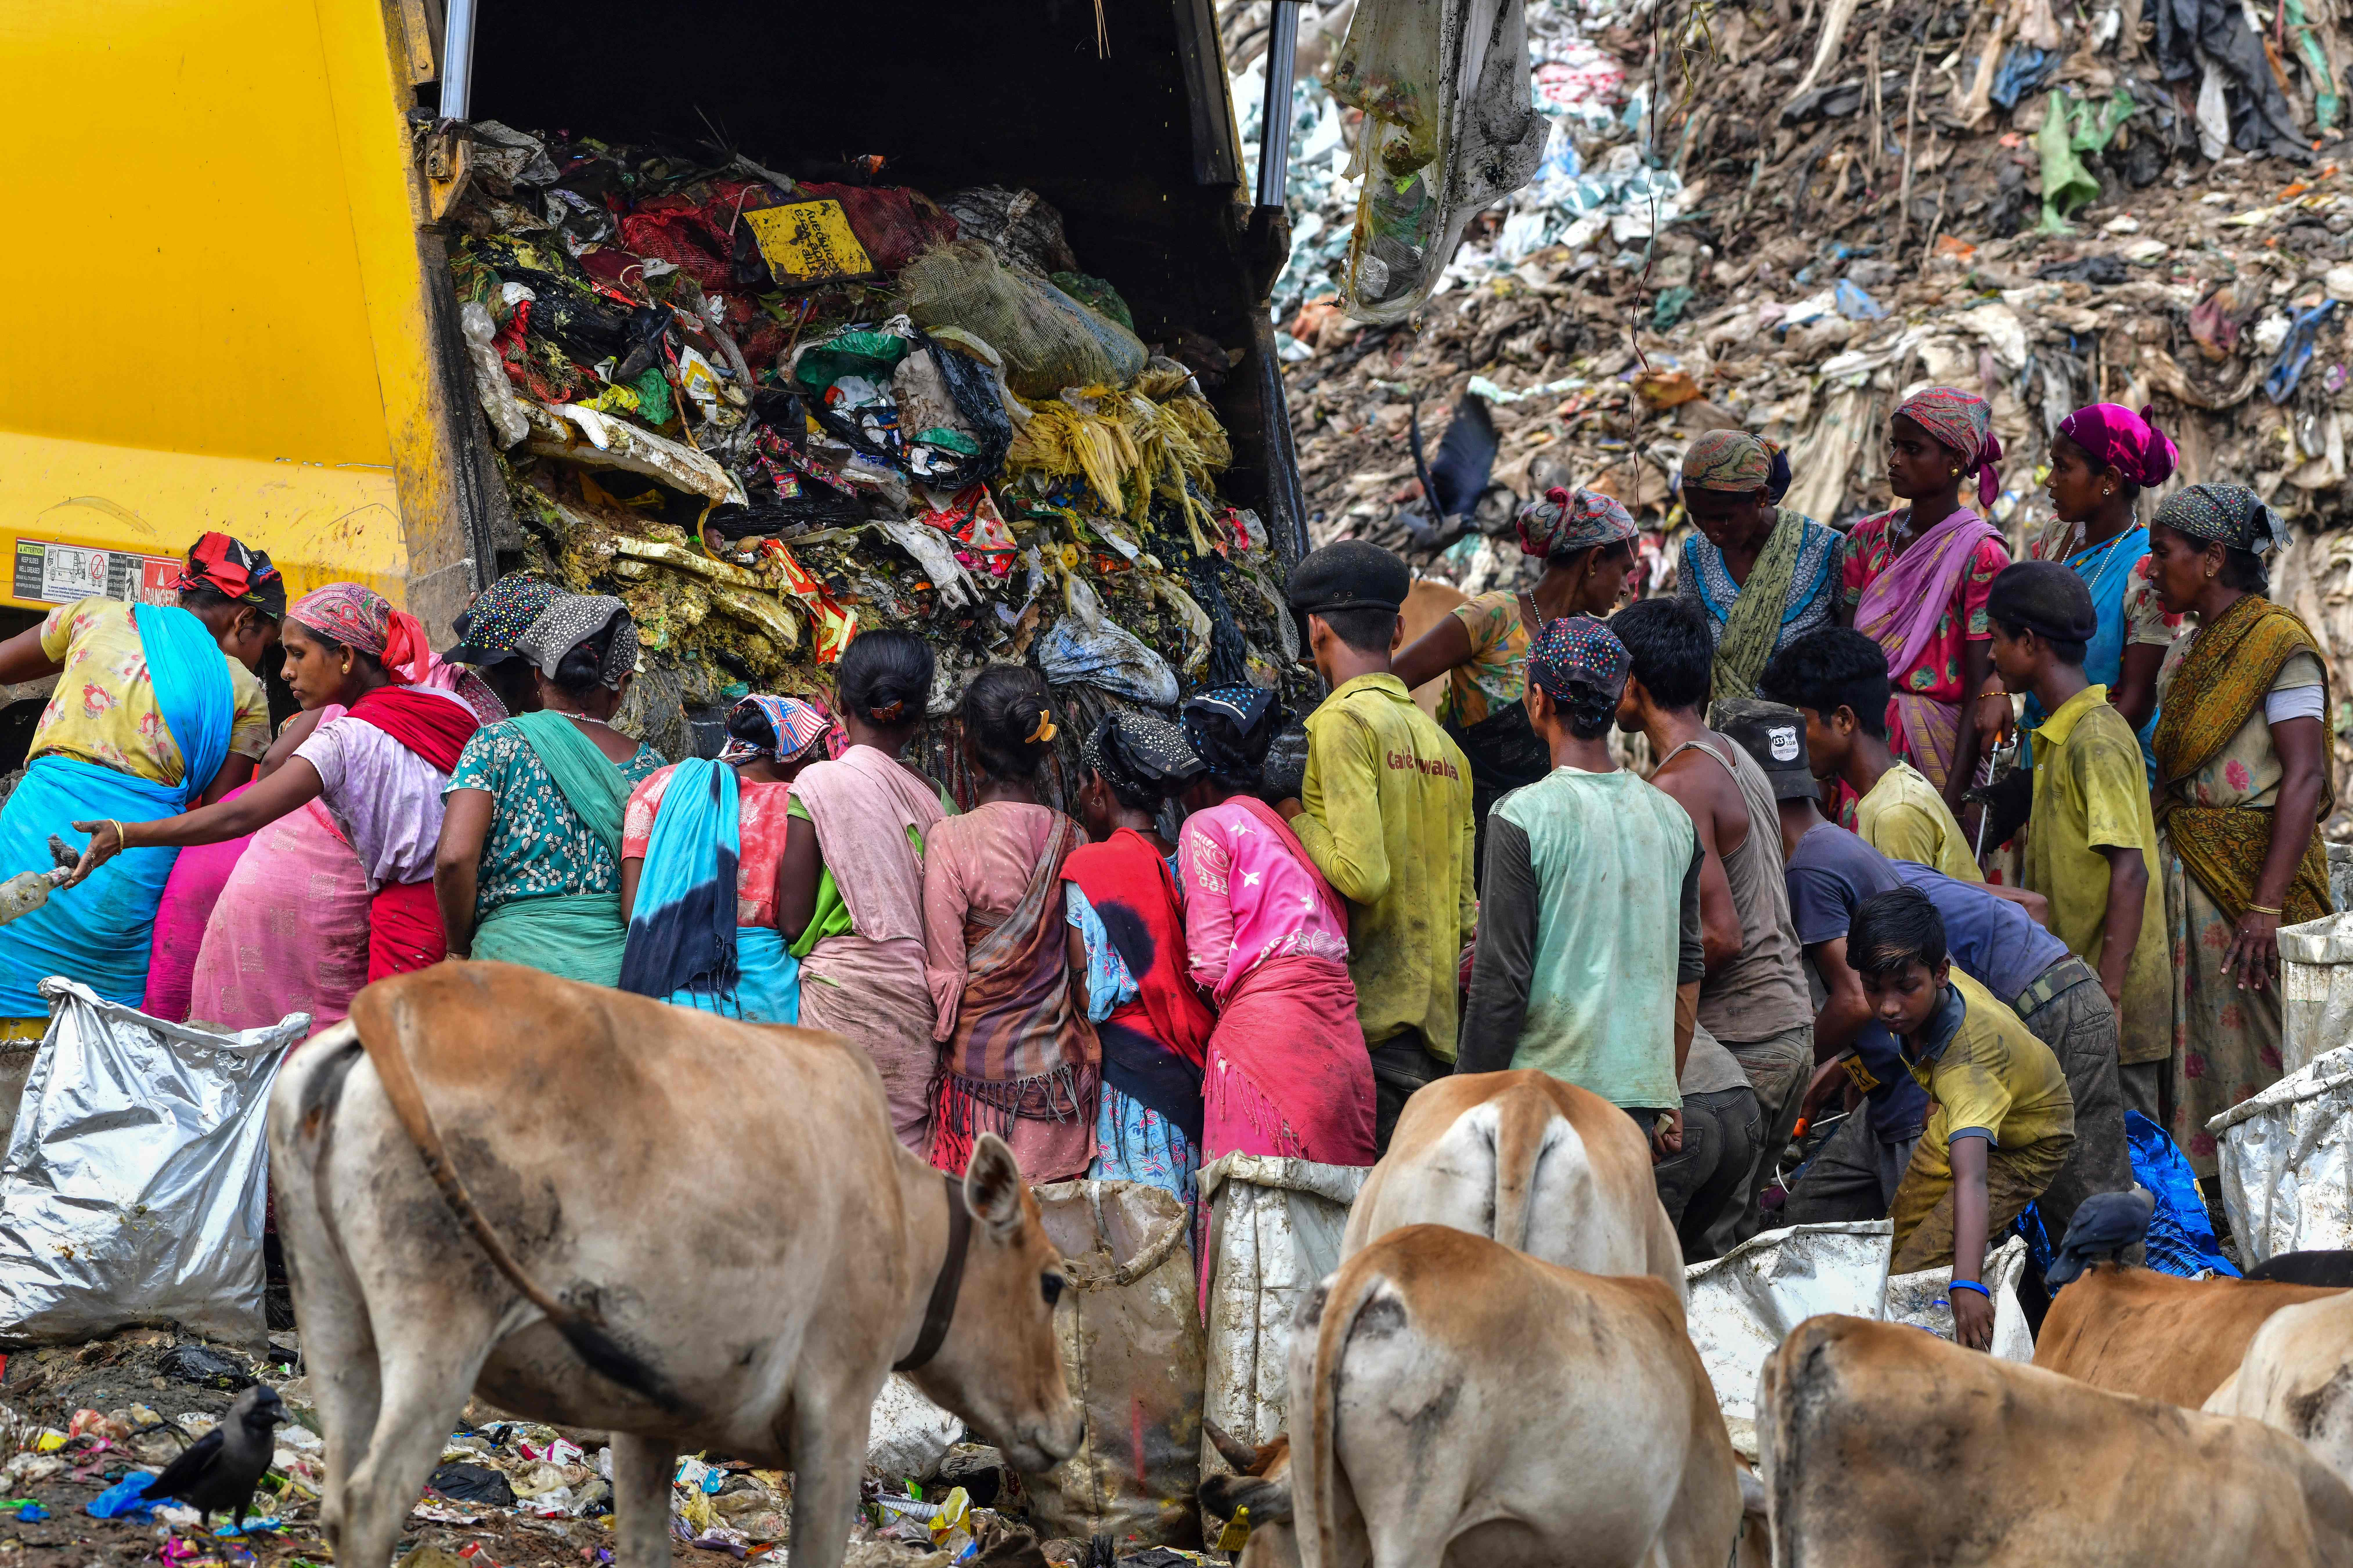 Rag-pickers stand by as a truck unloads rubbish at a dump in Guwahati